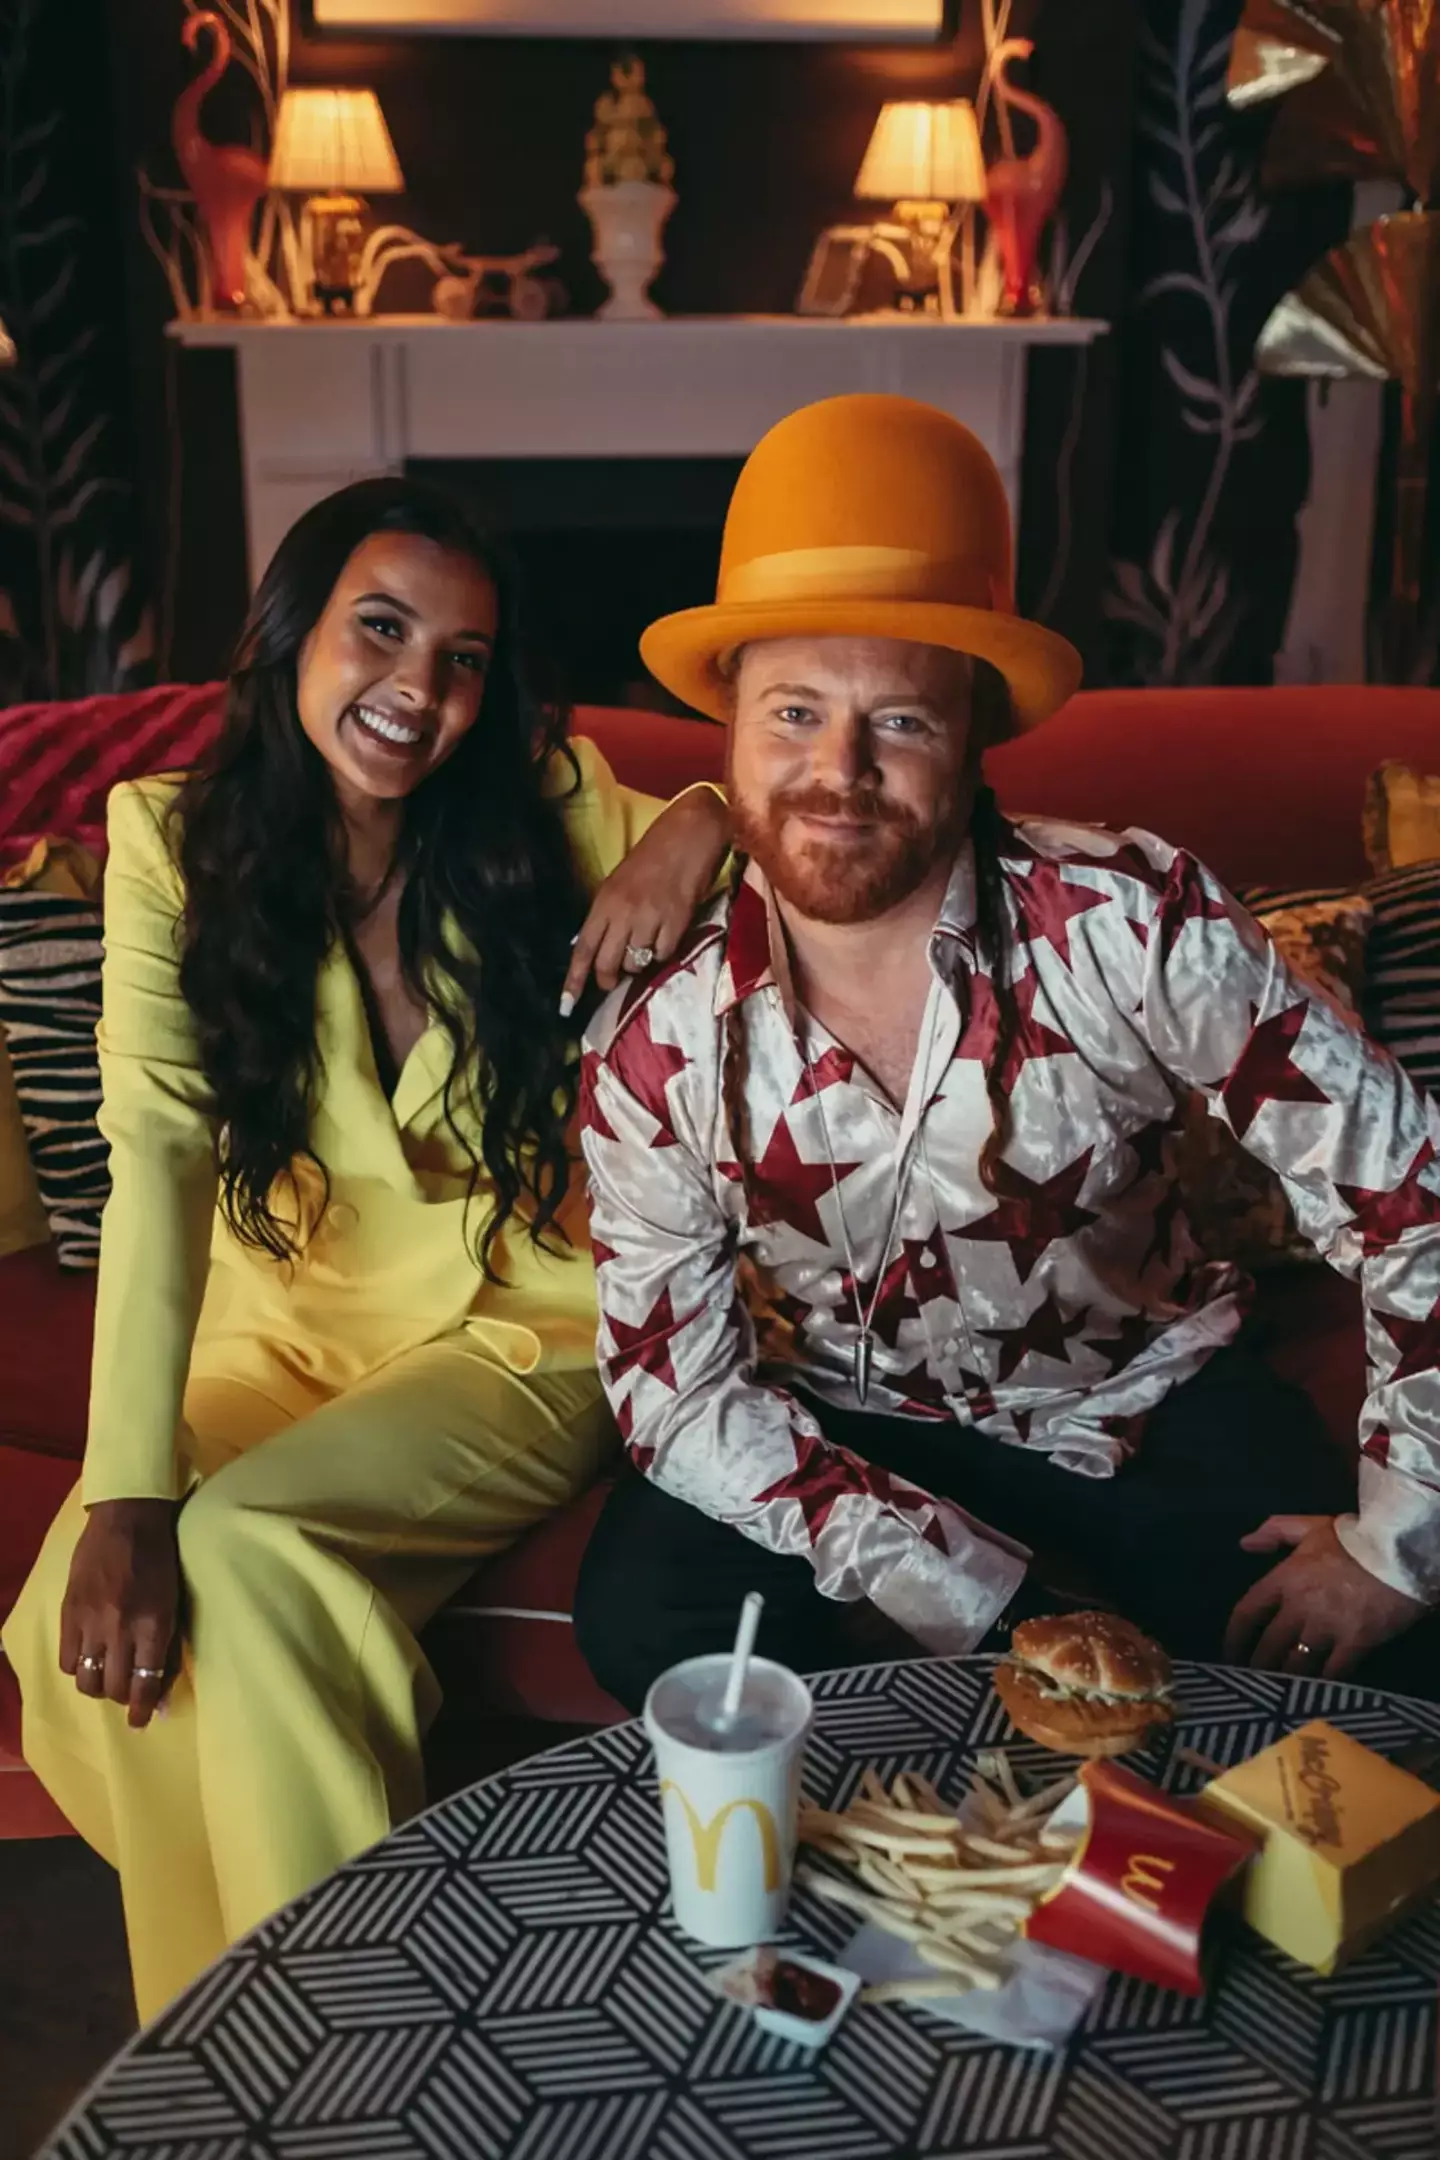 The new face of the burger is none other than Maya Jama and Keith Lemon.